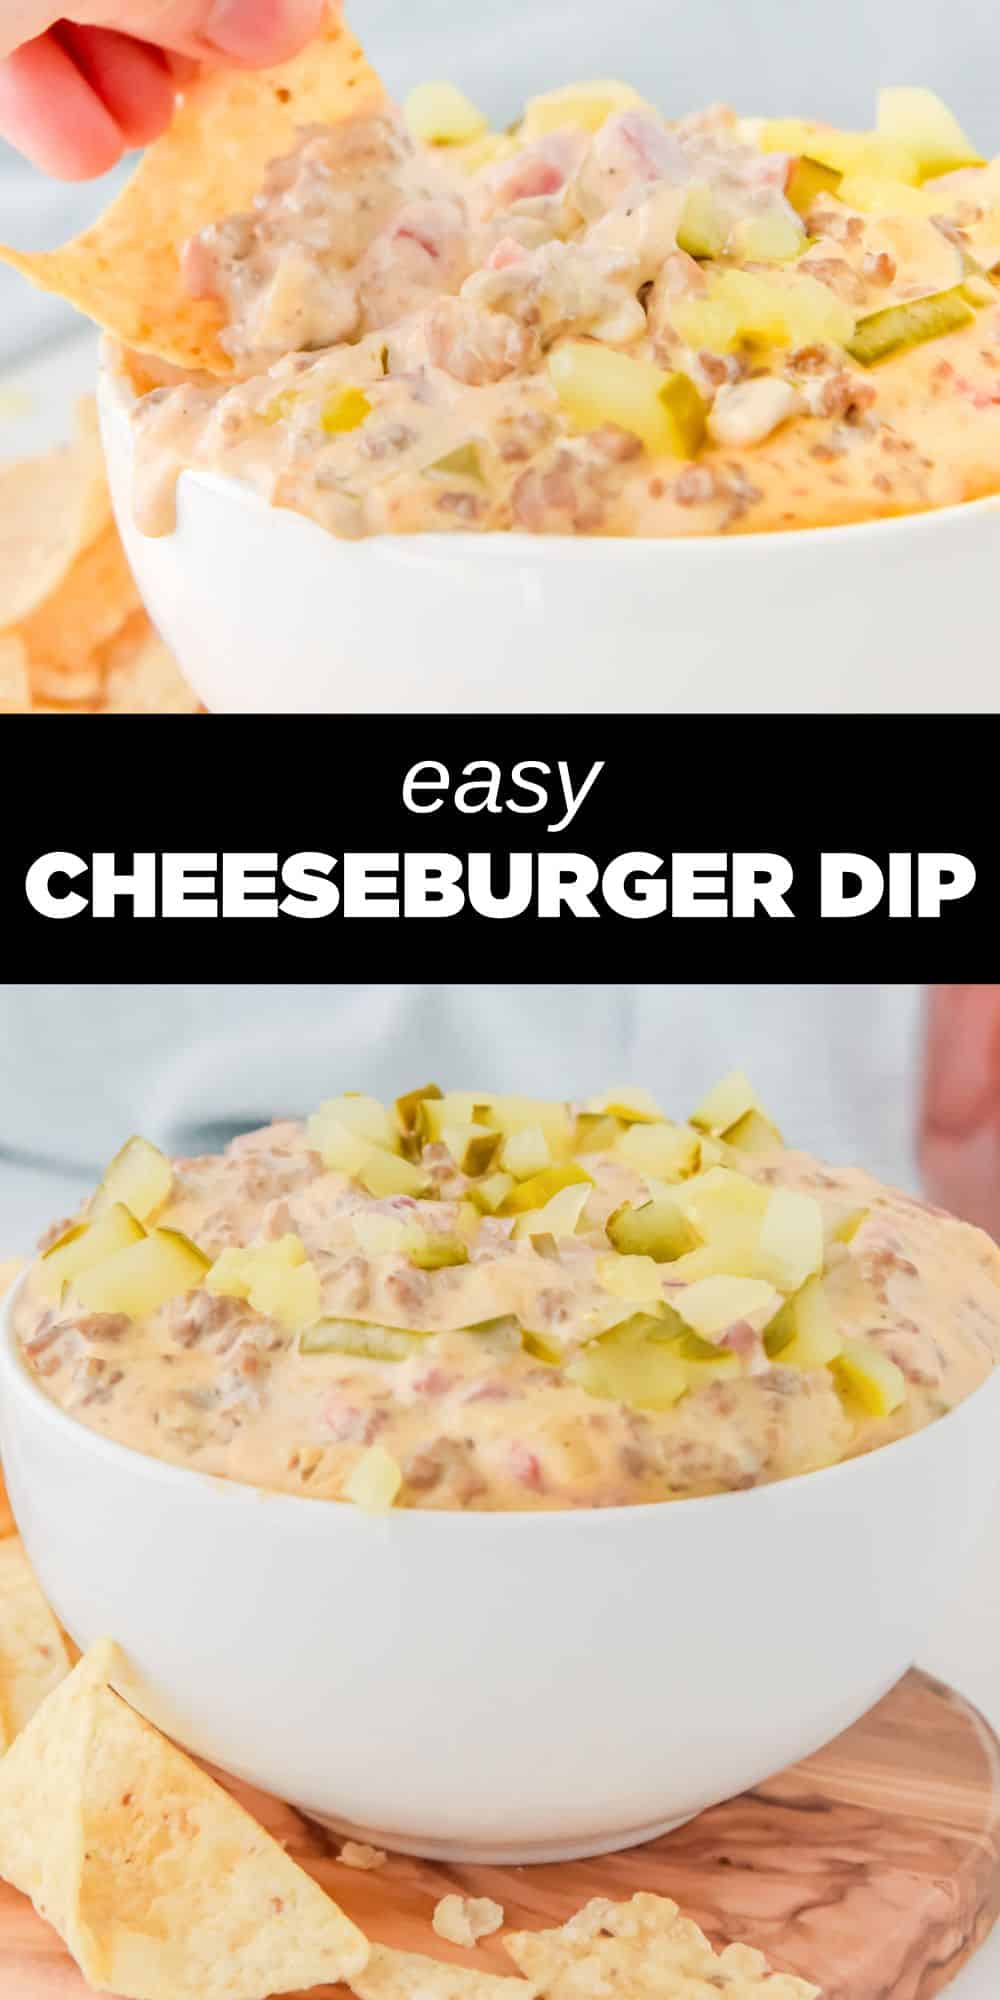 This hot and delicious Cheeseburger Dip is loaded with lots of cheesy goodness and all your favorite burger toppings. Whether it's for the big game or a summer cookout, it's the perfect party dip for any occasion.